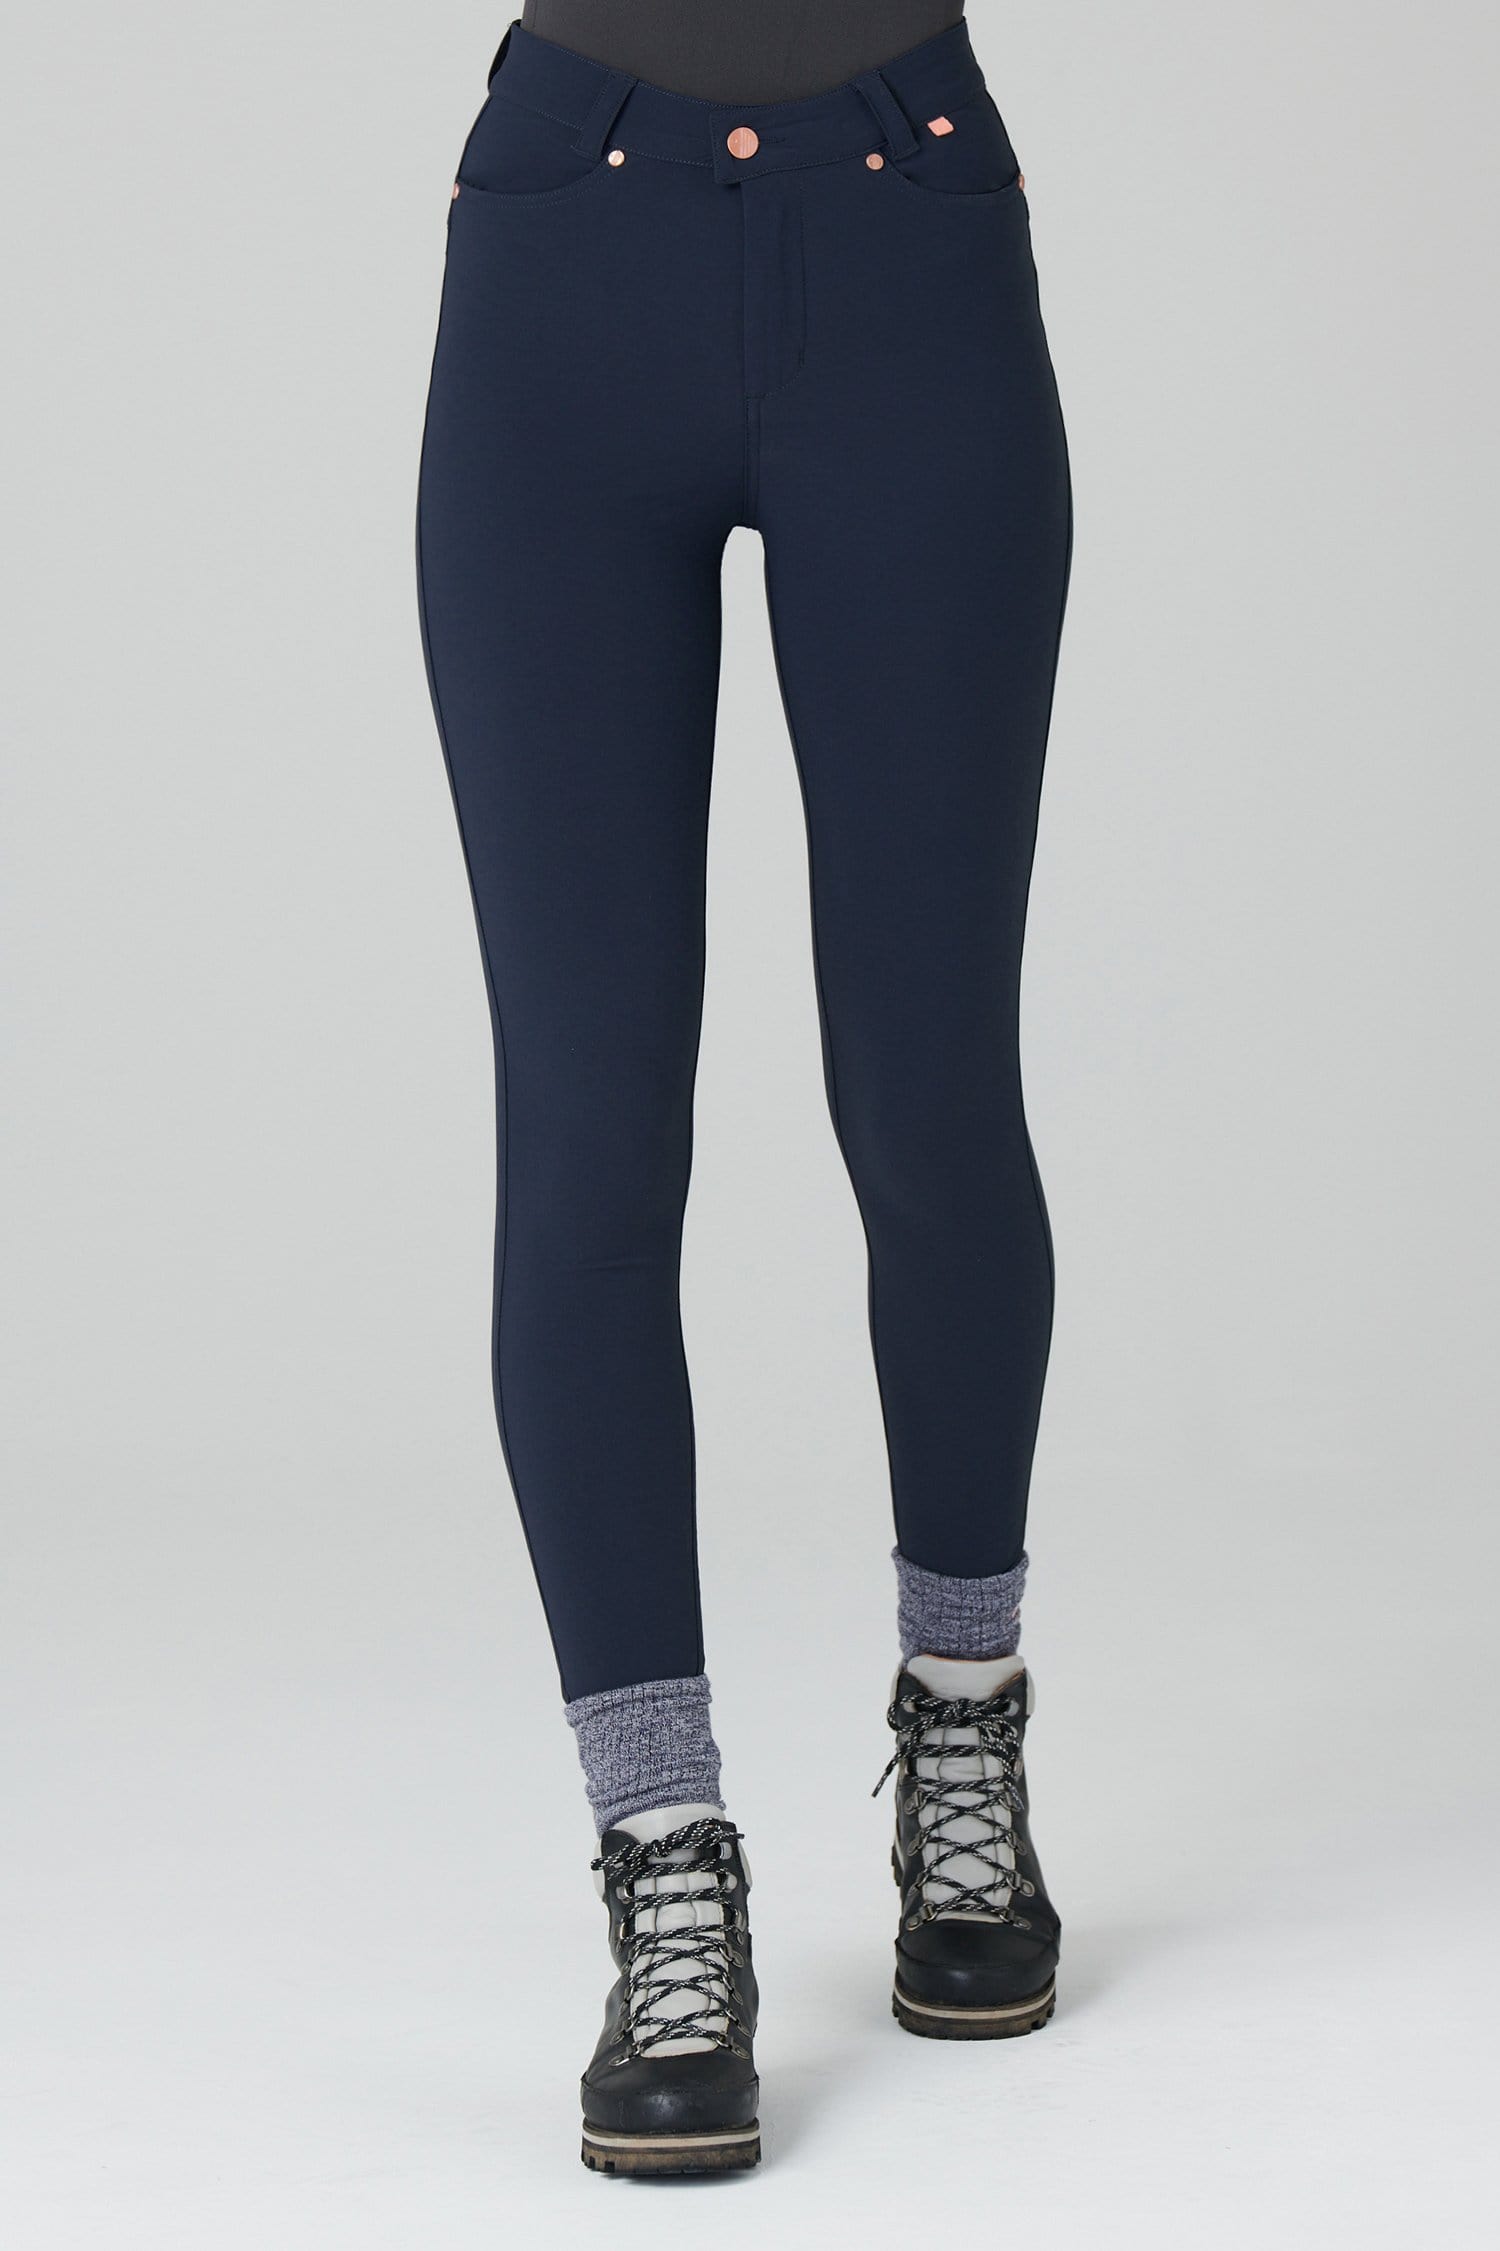 Thermal Skinny Outdoor Trousers - Deep Navy - 34xl / Uk16 - Womens - Acai Outdoorwear